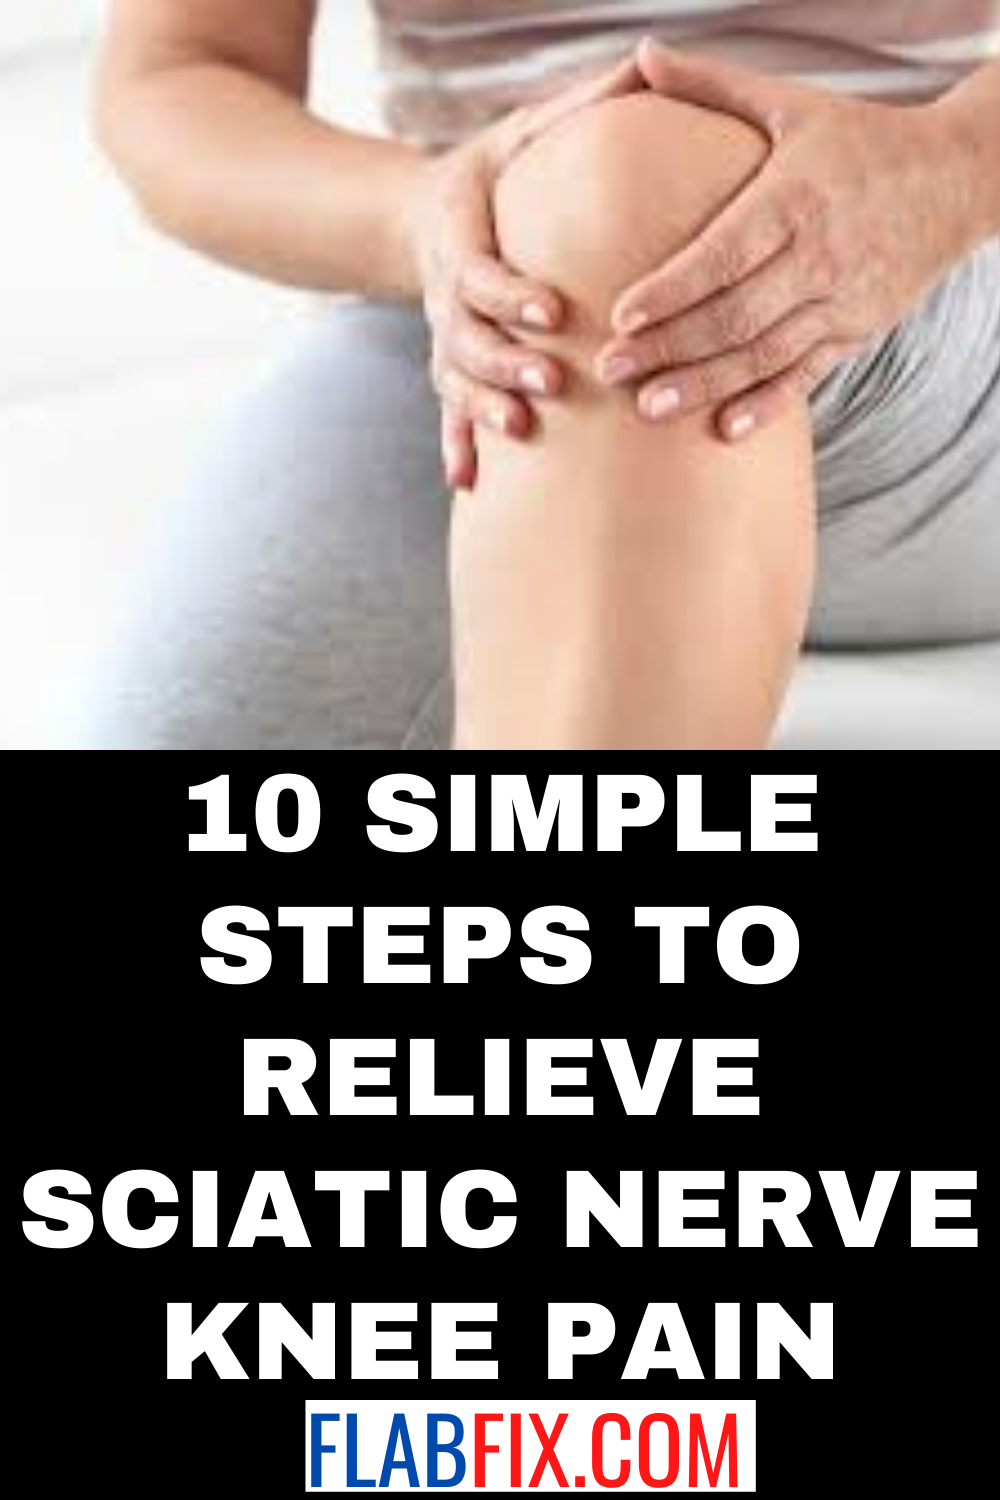 10 Simple Steps to Relieve Sciatic Nerve Knee Pain